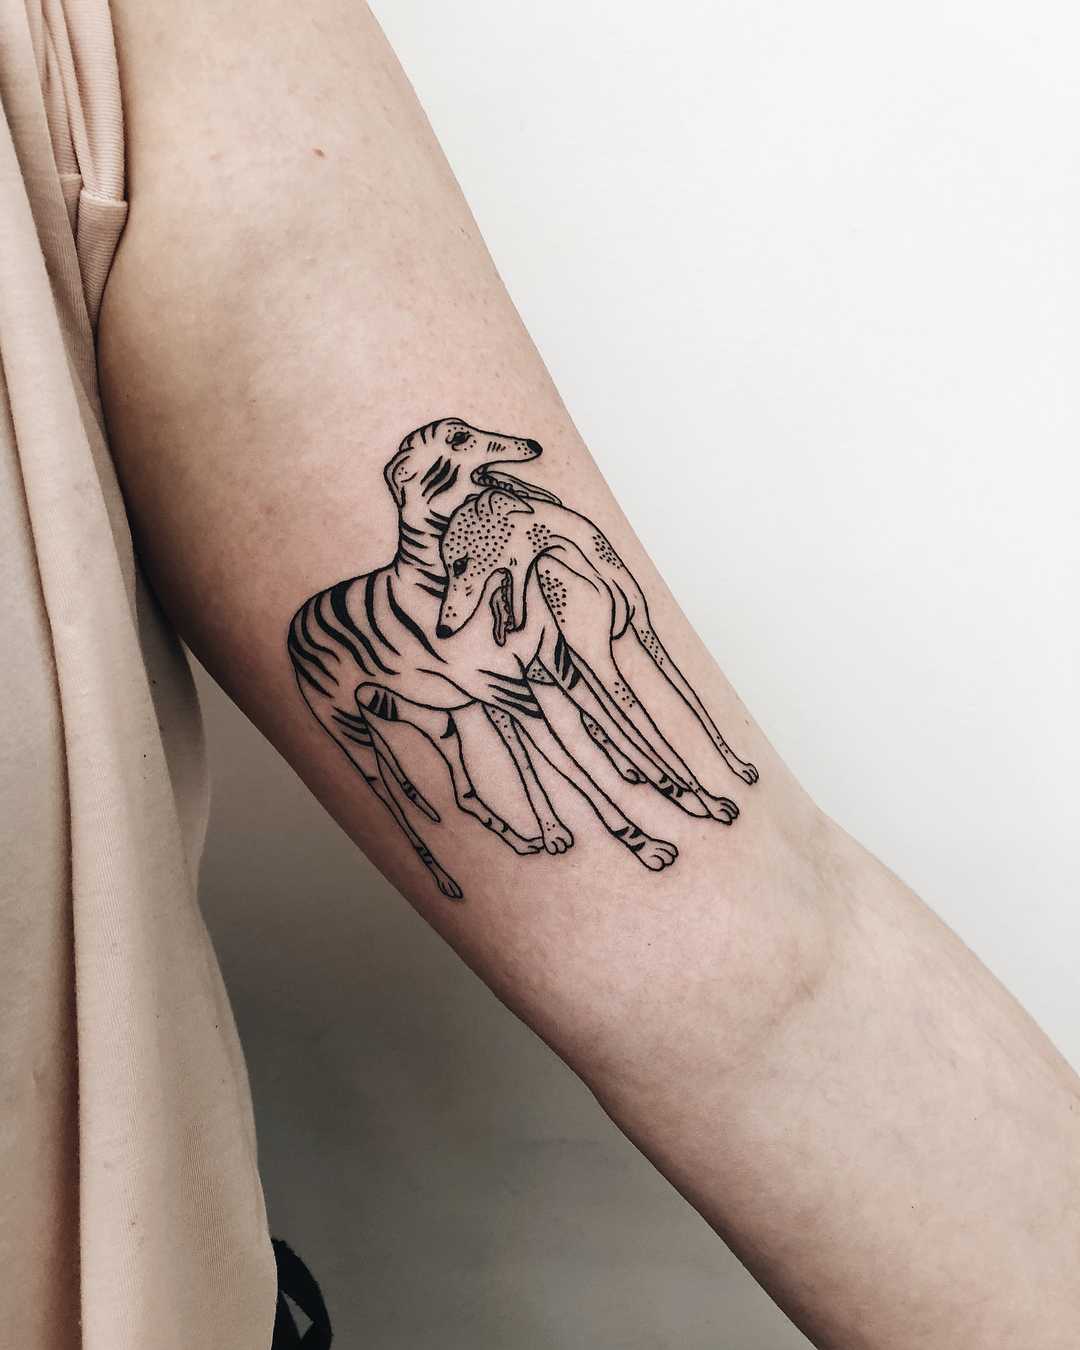 Two greyhounds tattoo by Finley Jordan